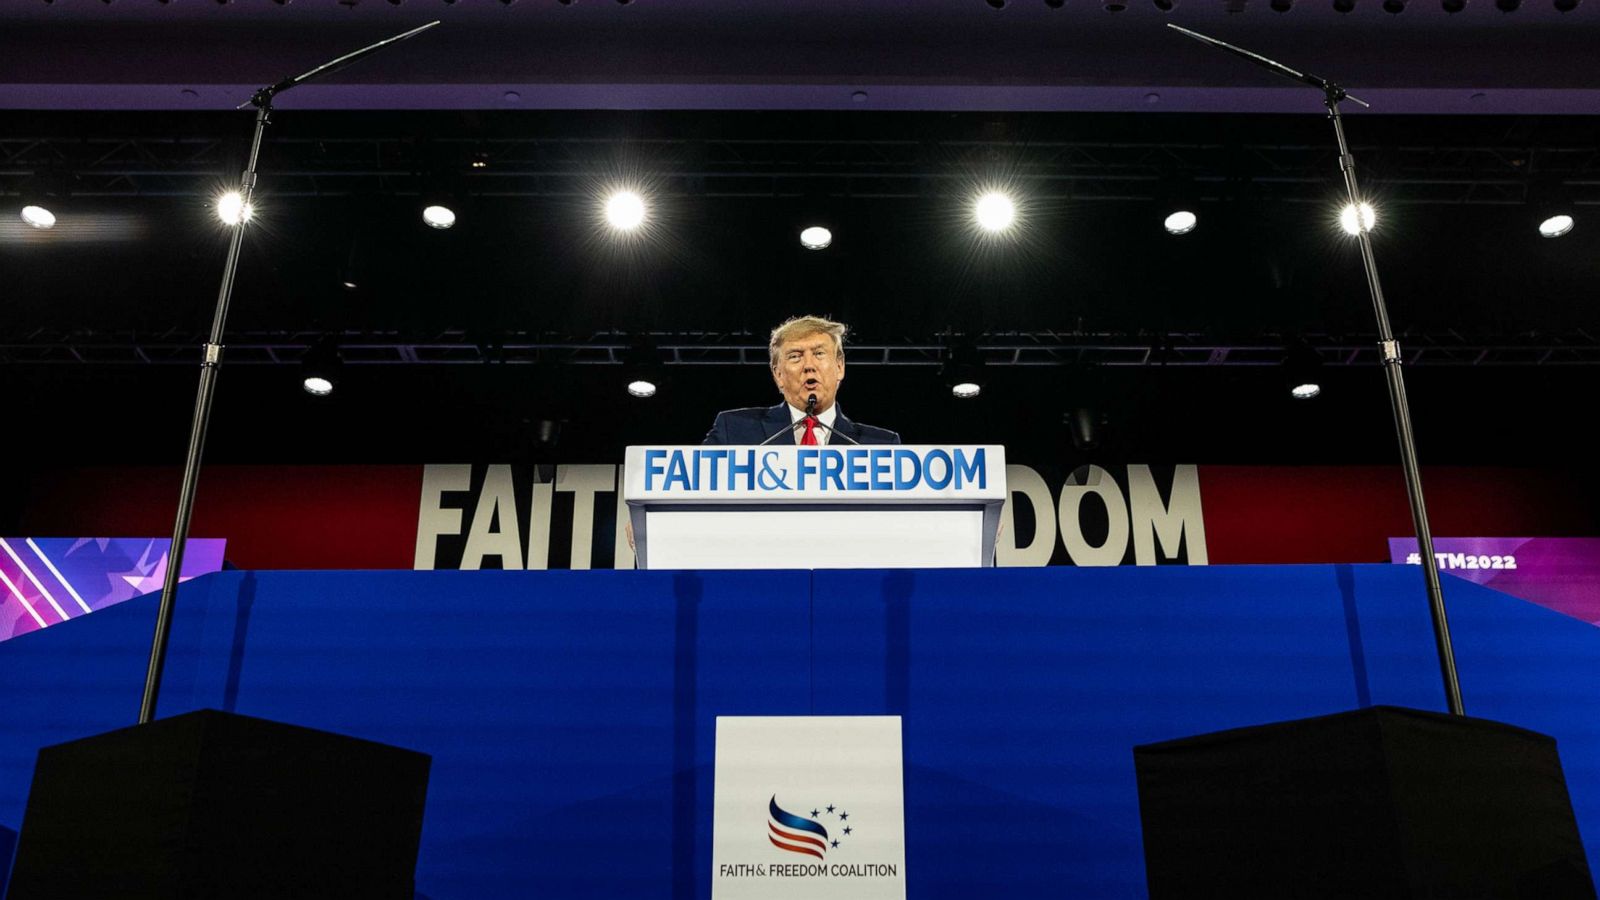 Christian nationalism' threatens democracy, some experts say - ABC News